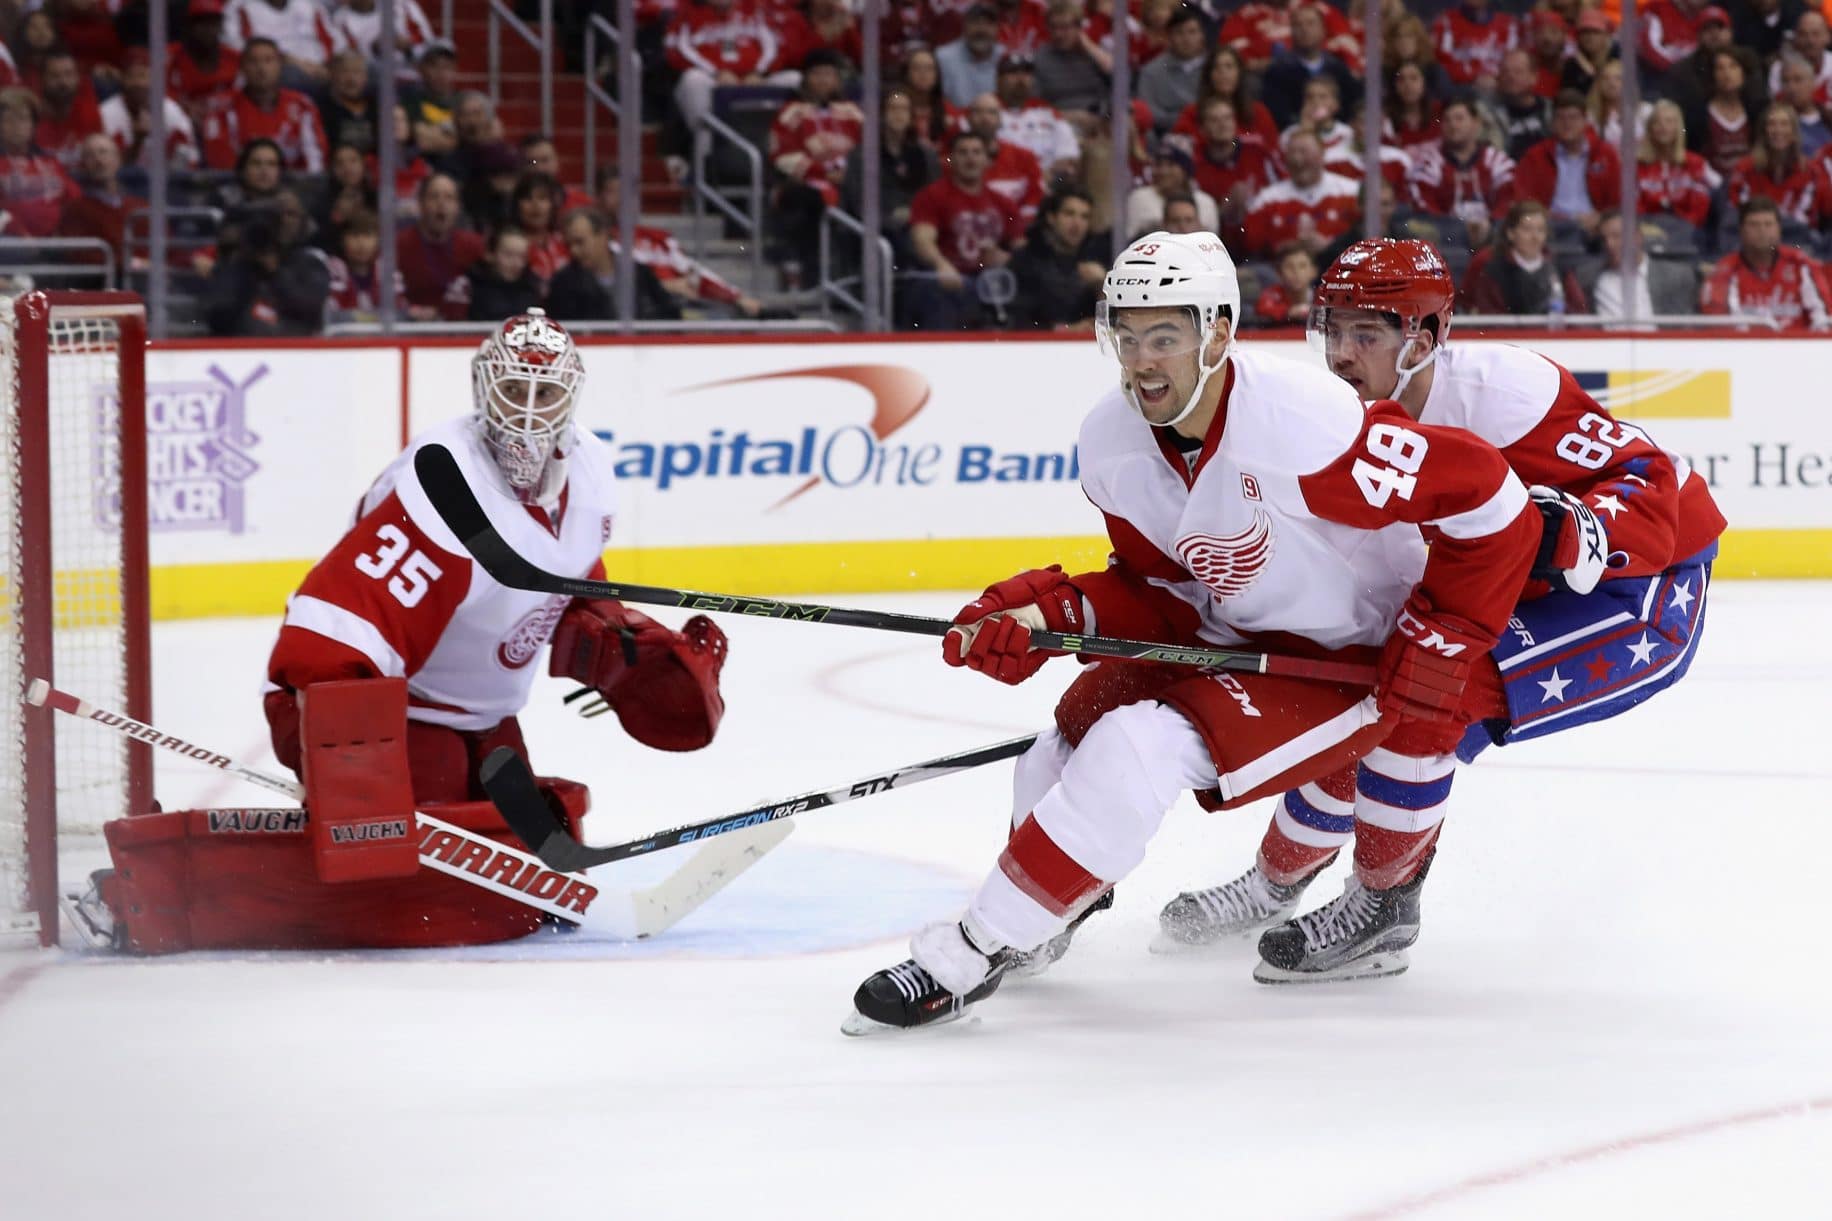 New York Rangers and Detroit Red Wings Complete Minor League Trade 